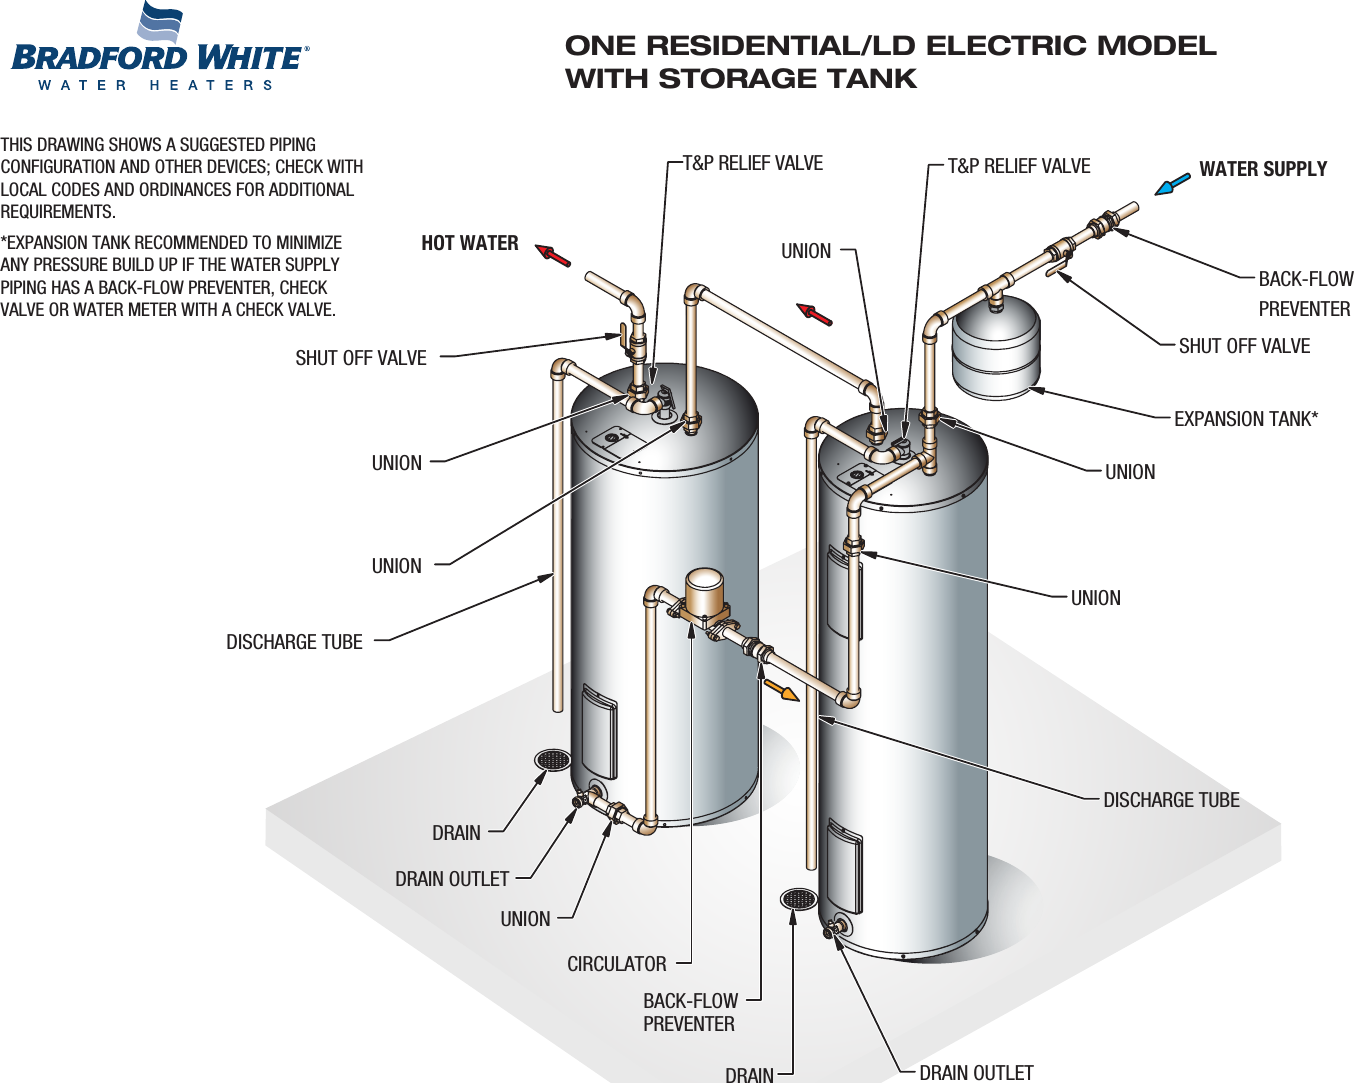 Page 1 of 1 - Bradfordwhite Piping Diagram Residential Electric Upright Single Water Heater With Top Connections Piped To Storage Tank FRR-PIP0938-PIPING-DIAGRAMS User Manual